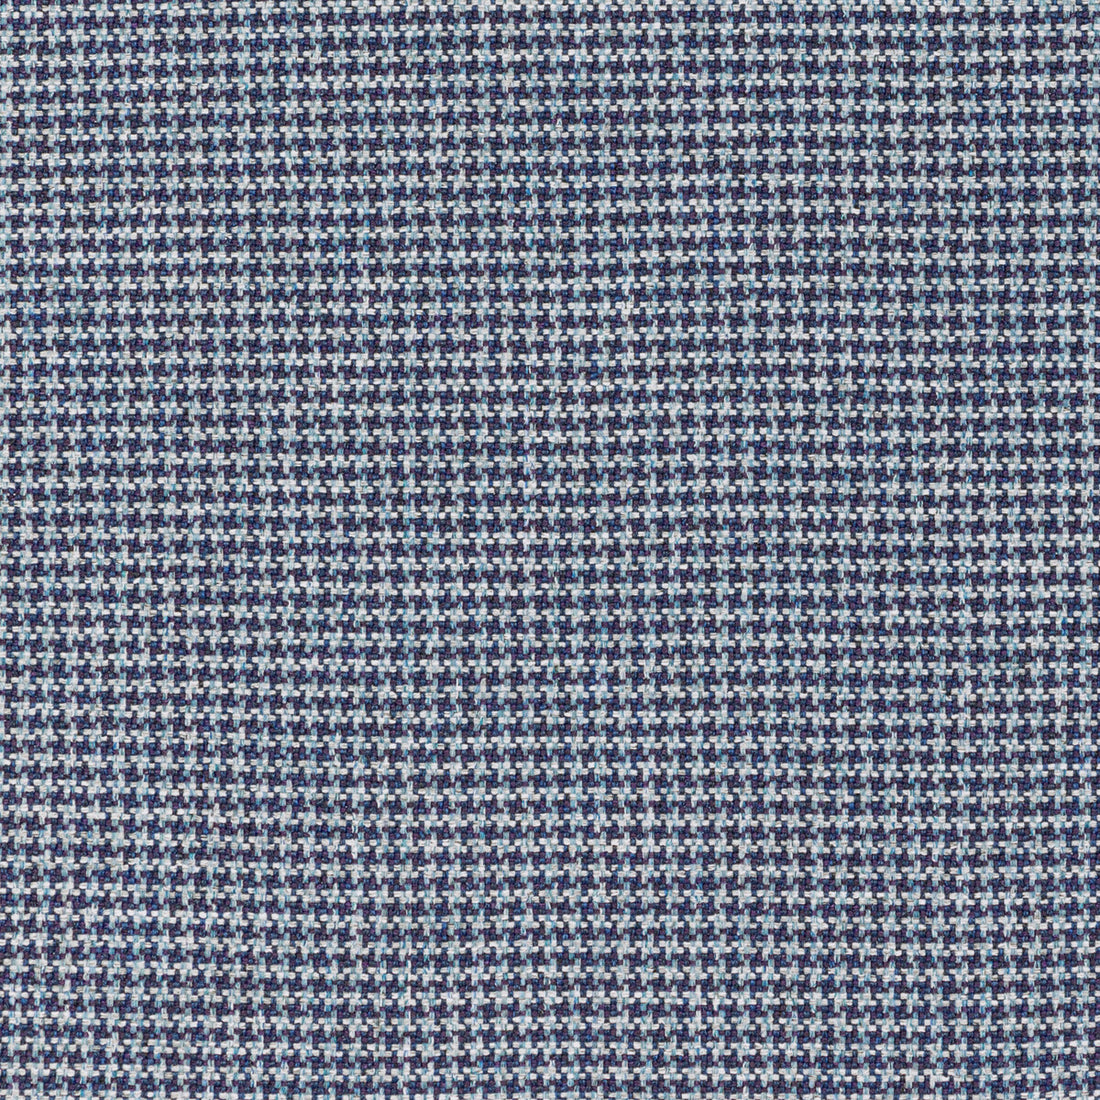 Steamboat fabric in coastal color - pattern 36258.50.0 - by Kravet Contract in the Supreen collection